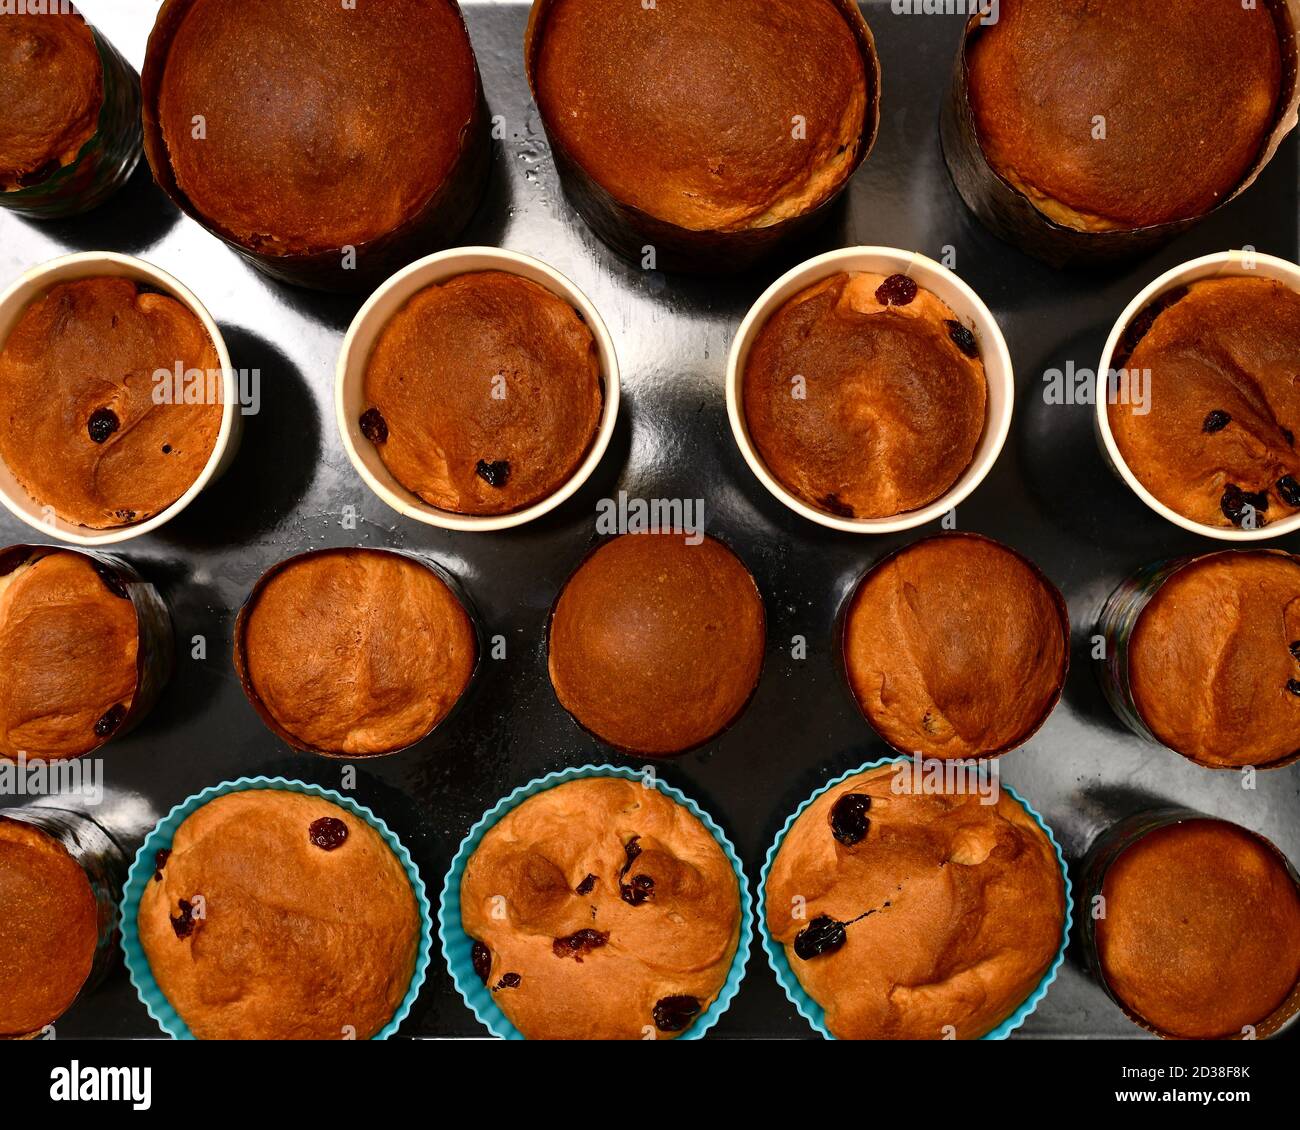 A background of baked ruddy Easter cakes, in round baking tins, on a black oven baking sheet. Stock Photo